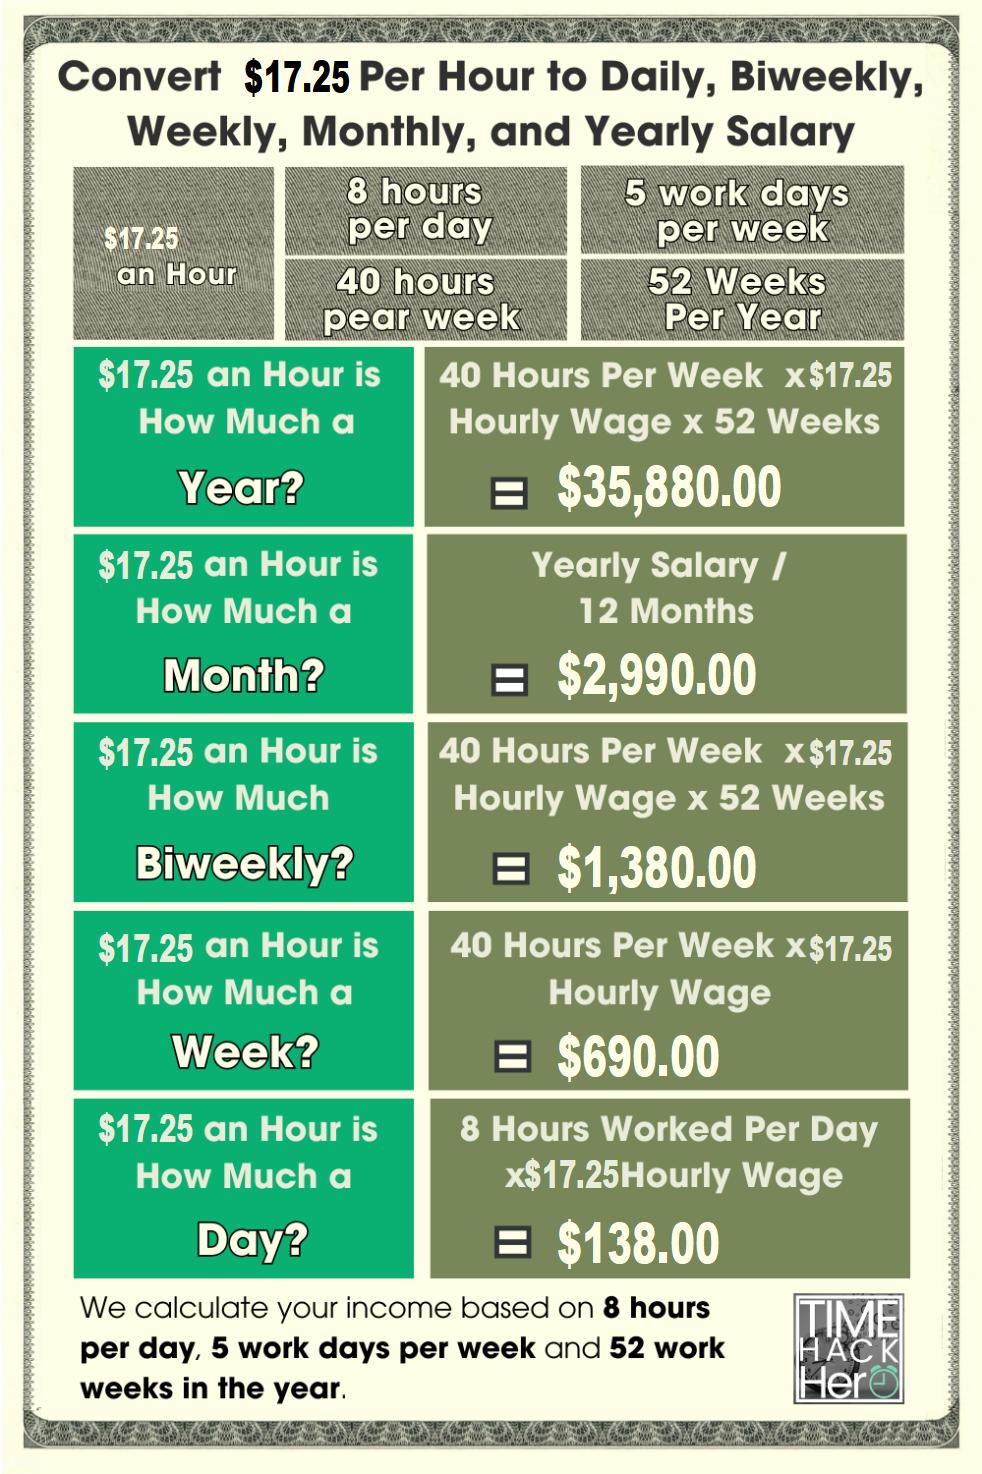 Convert $17.25 Per Hour to Weekly, Monthly, and Yearly Salary